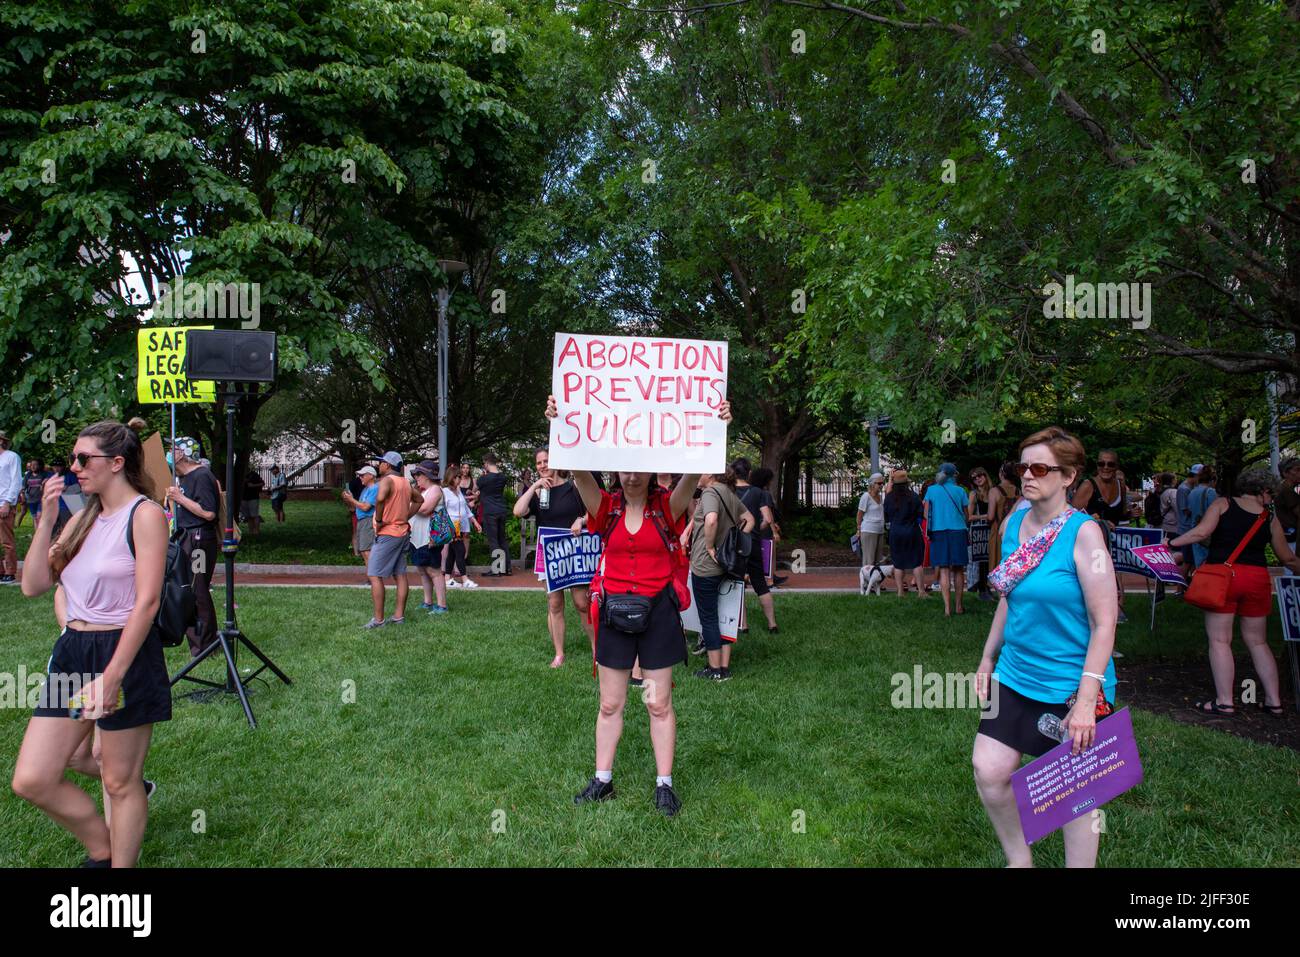 Woman at pro-choice rally holds feminist protest sign ABORTION PREVENTS SUICIDE Stock Photo